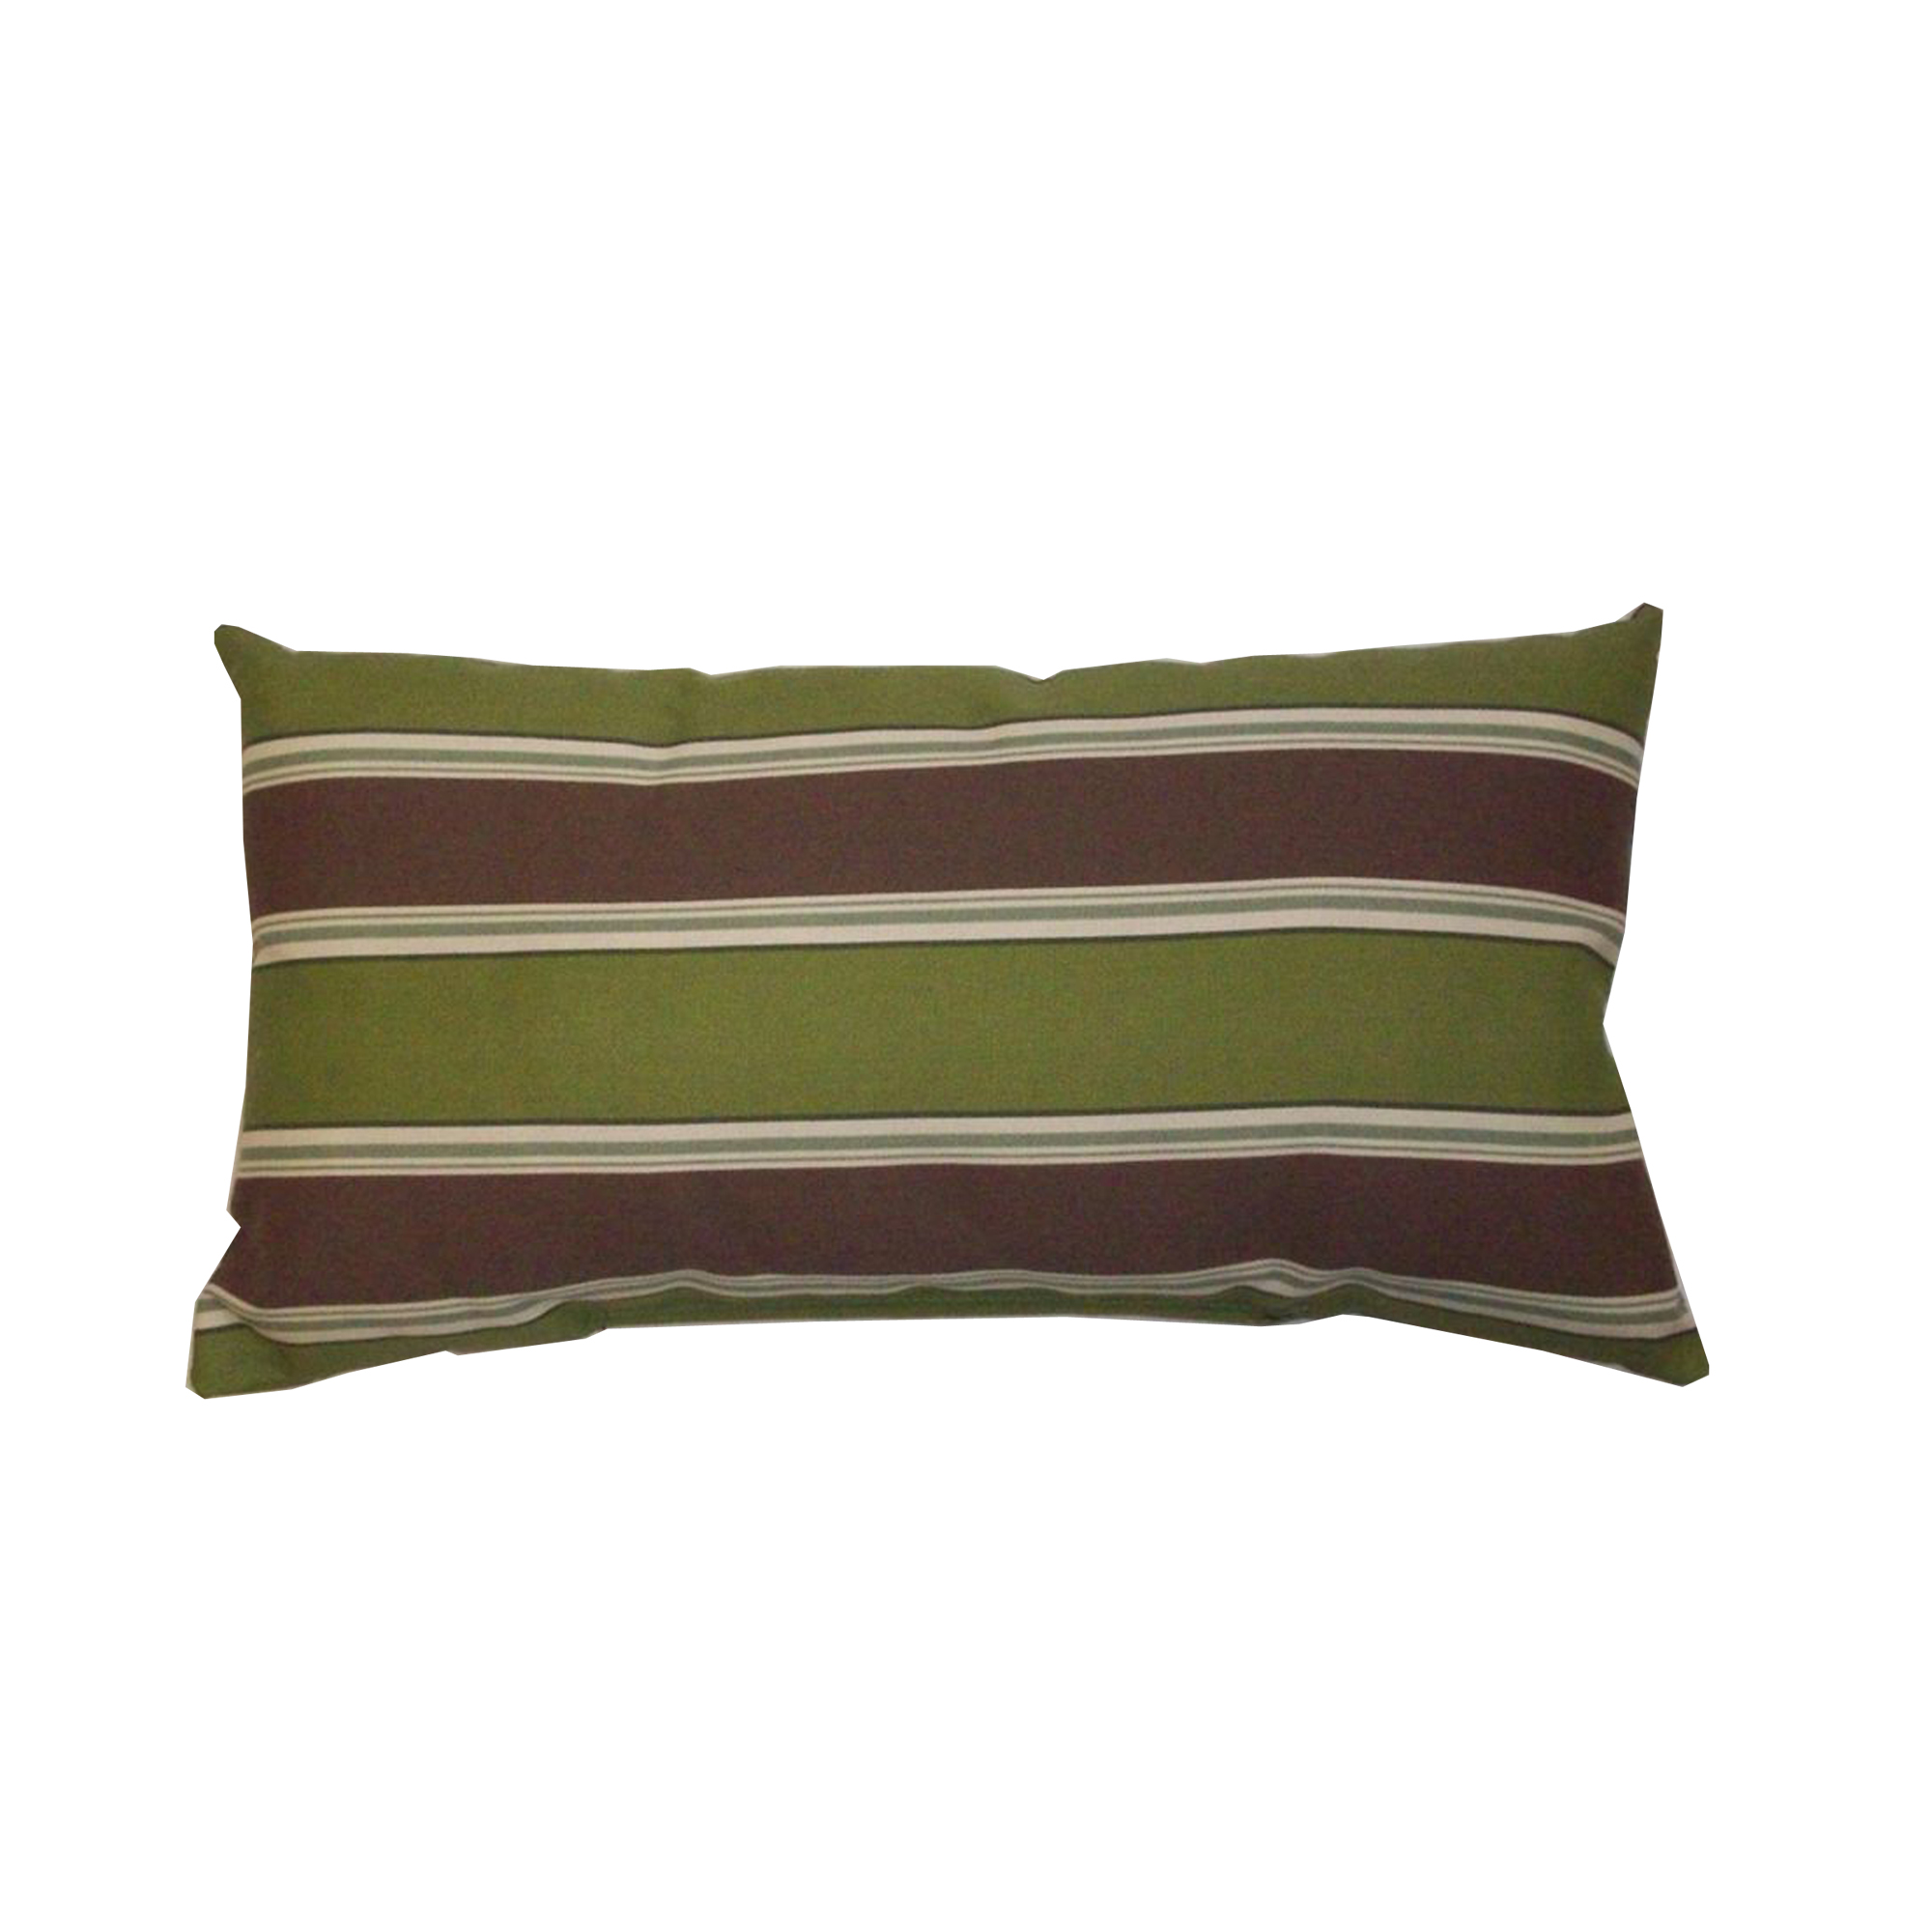 Image of Bozanto 16.5-in Rectangular Green with Brown Stripe Outdoor Toss Cushion